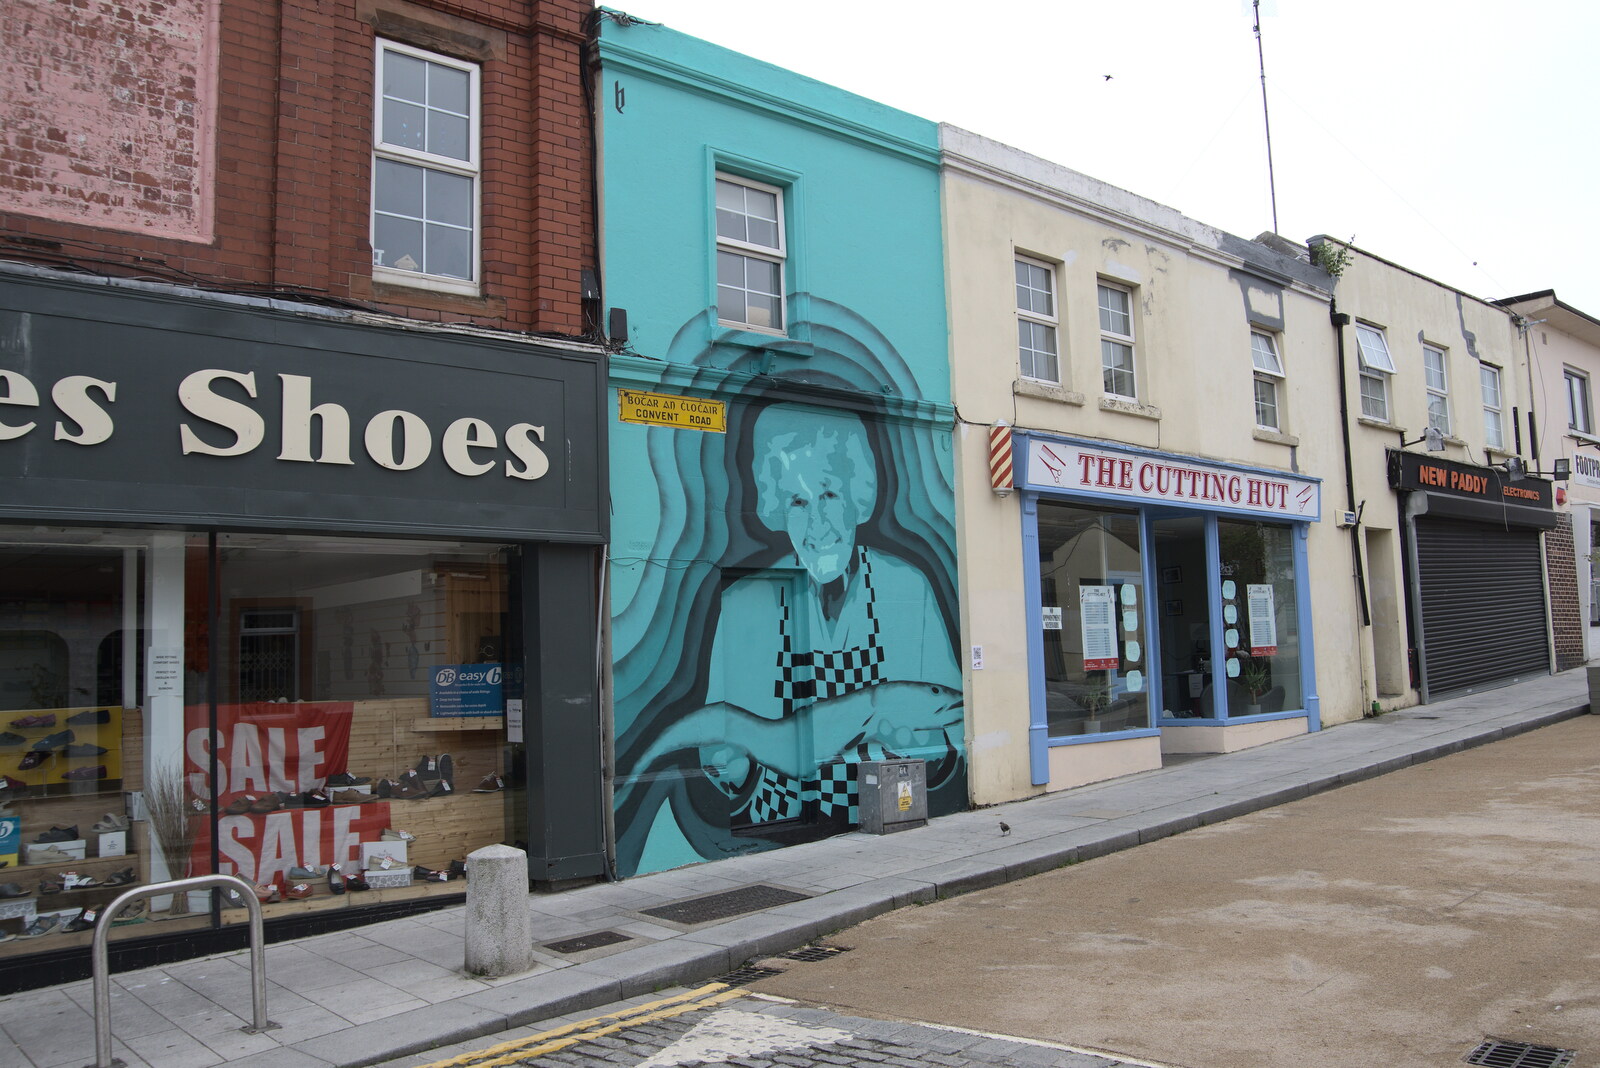 A wall mural of a fish monger from Manorhamilton and the Street Art of Dún Laoghaire, Ireland - 15th August 2021